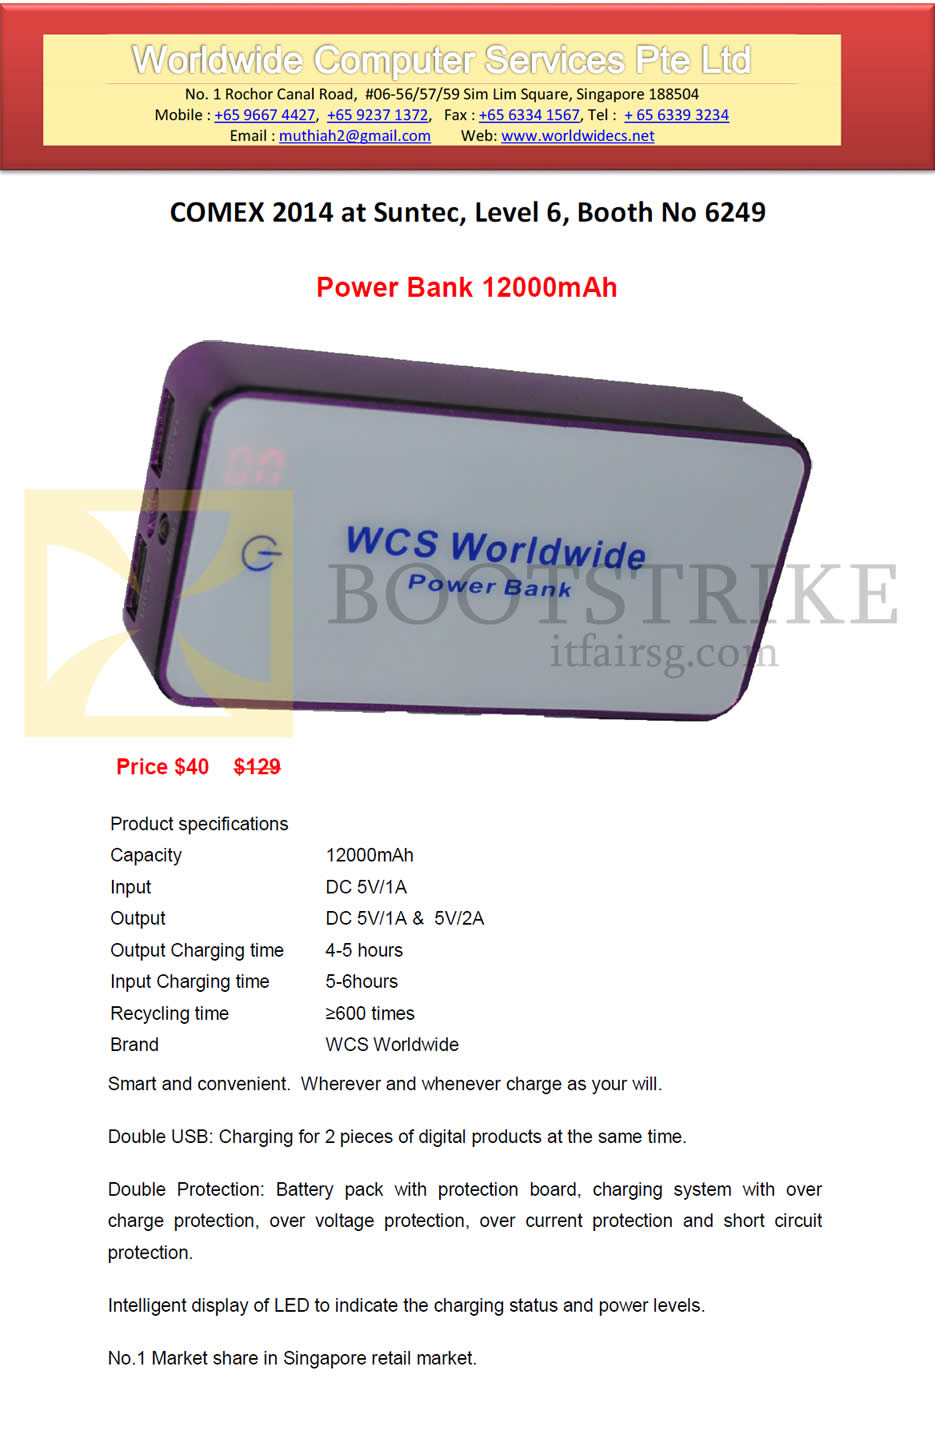 COMEX 2014 price list image brochure of Worldwide Computer Services 12000mAh Power Bank